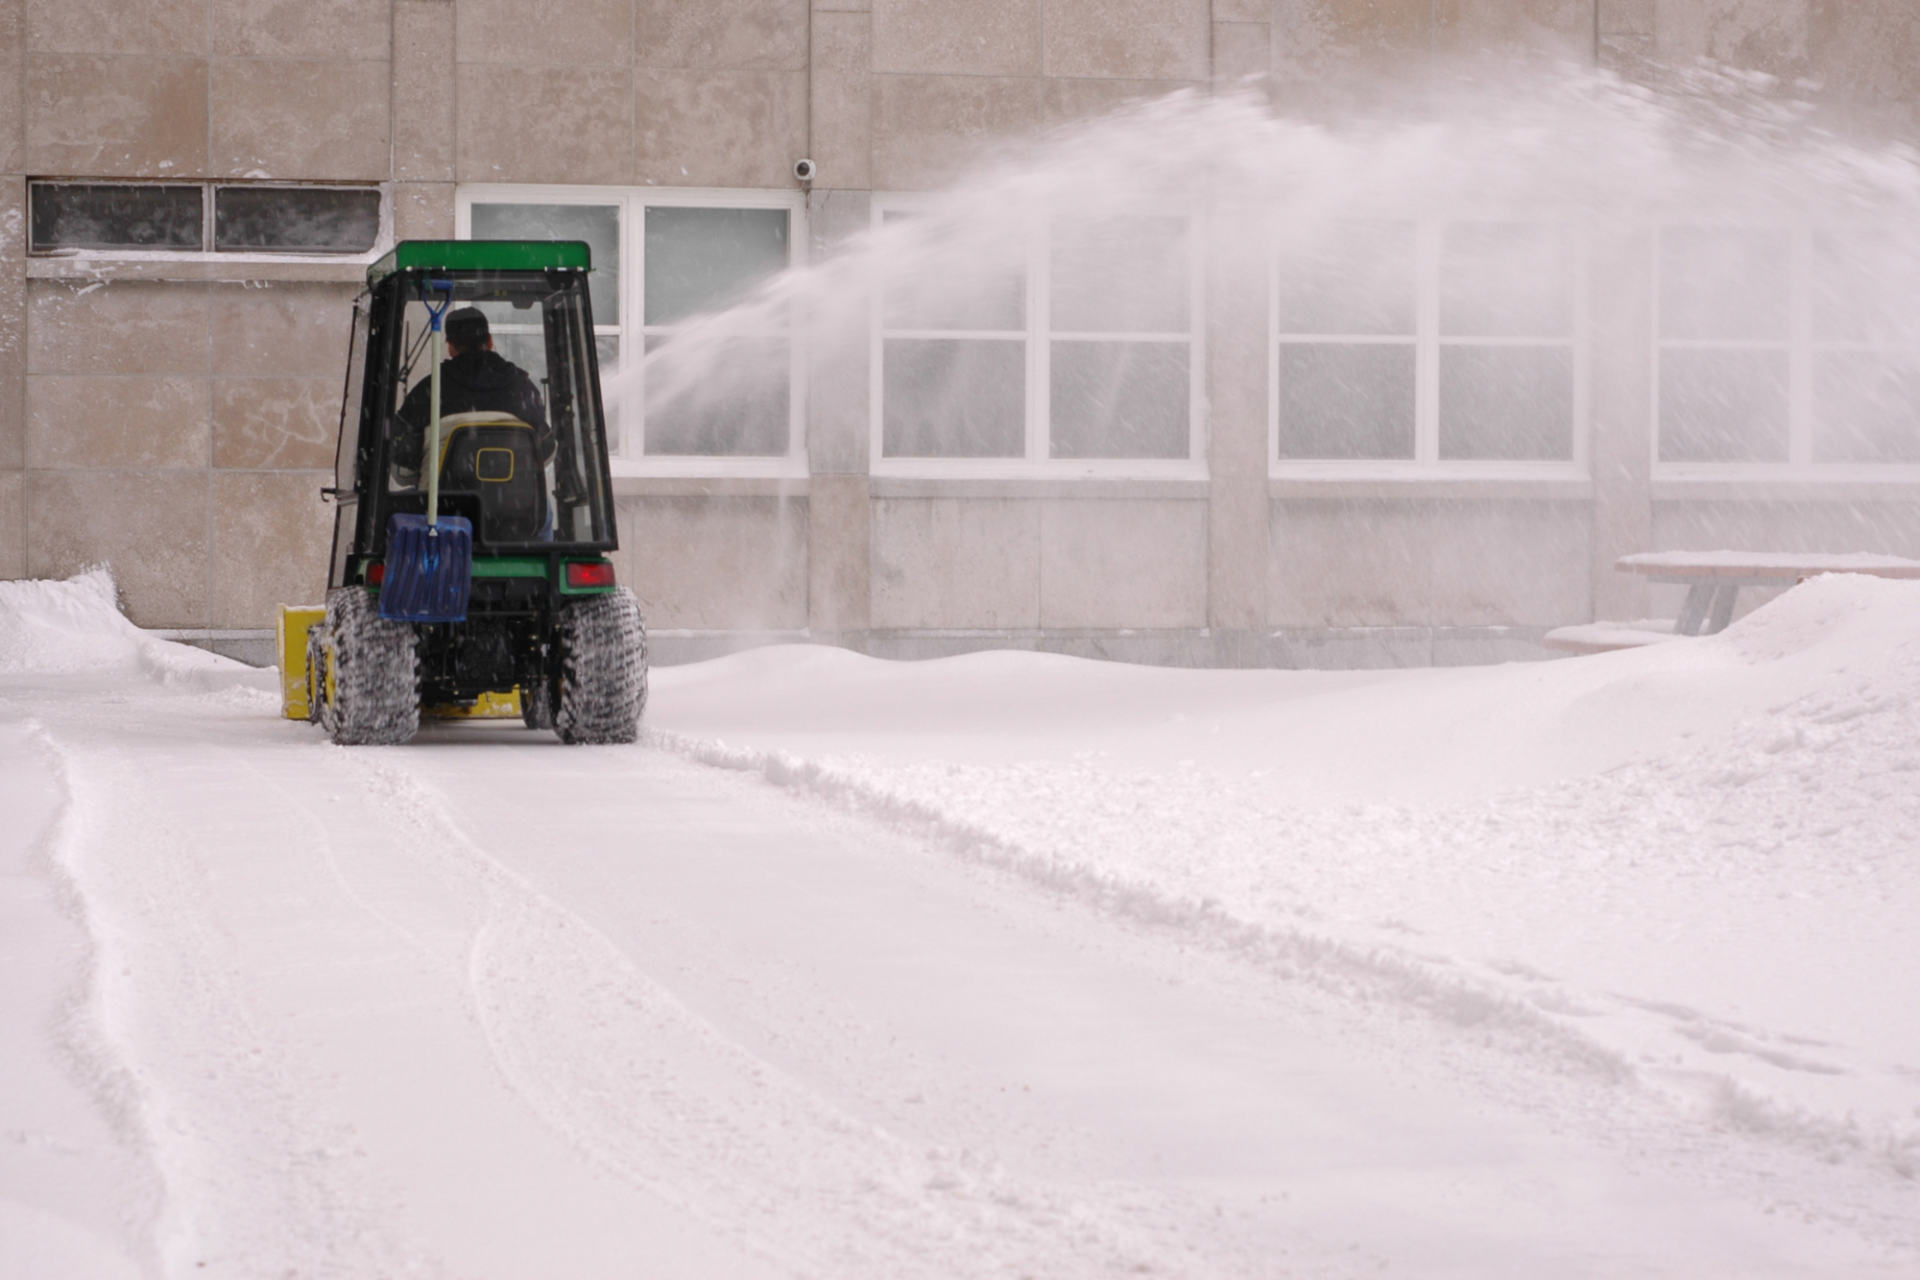 A person is operating a snowblower vehicle to clear snow near a building with large windows during winter, creating a spray of snow to the side.